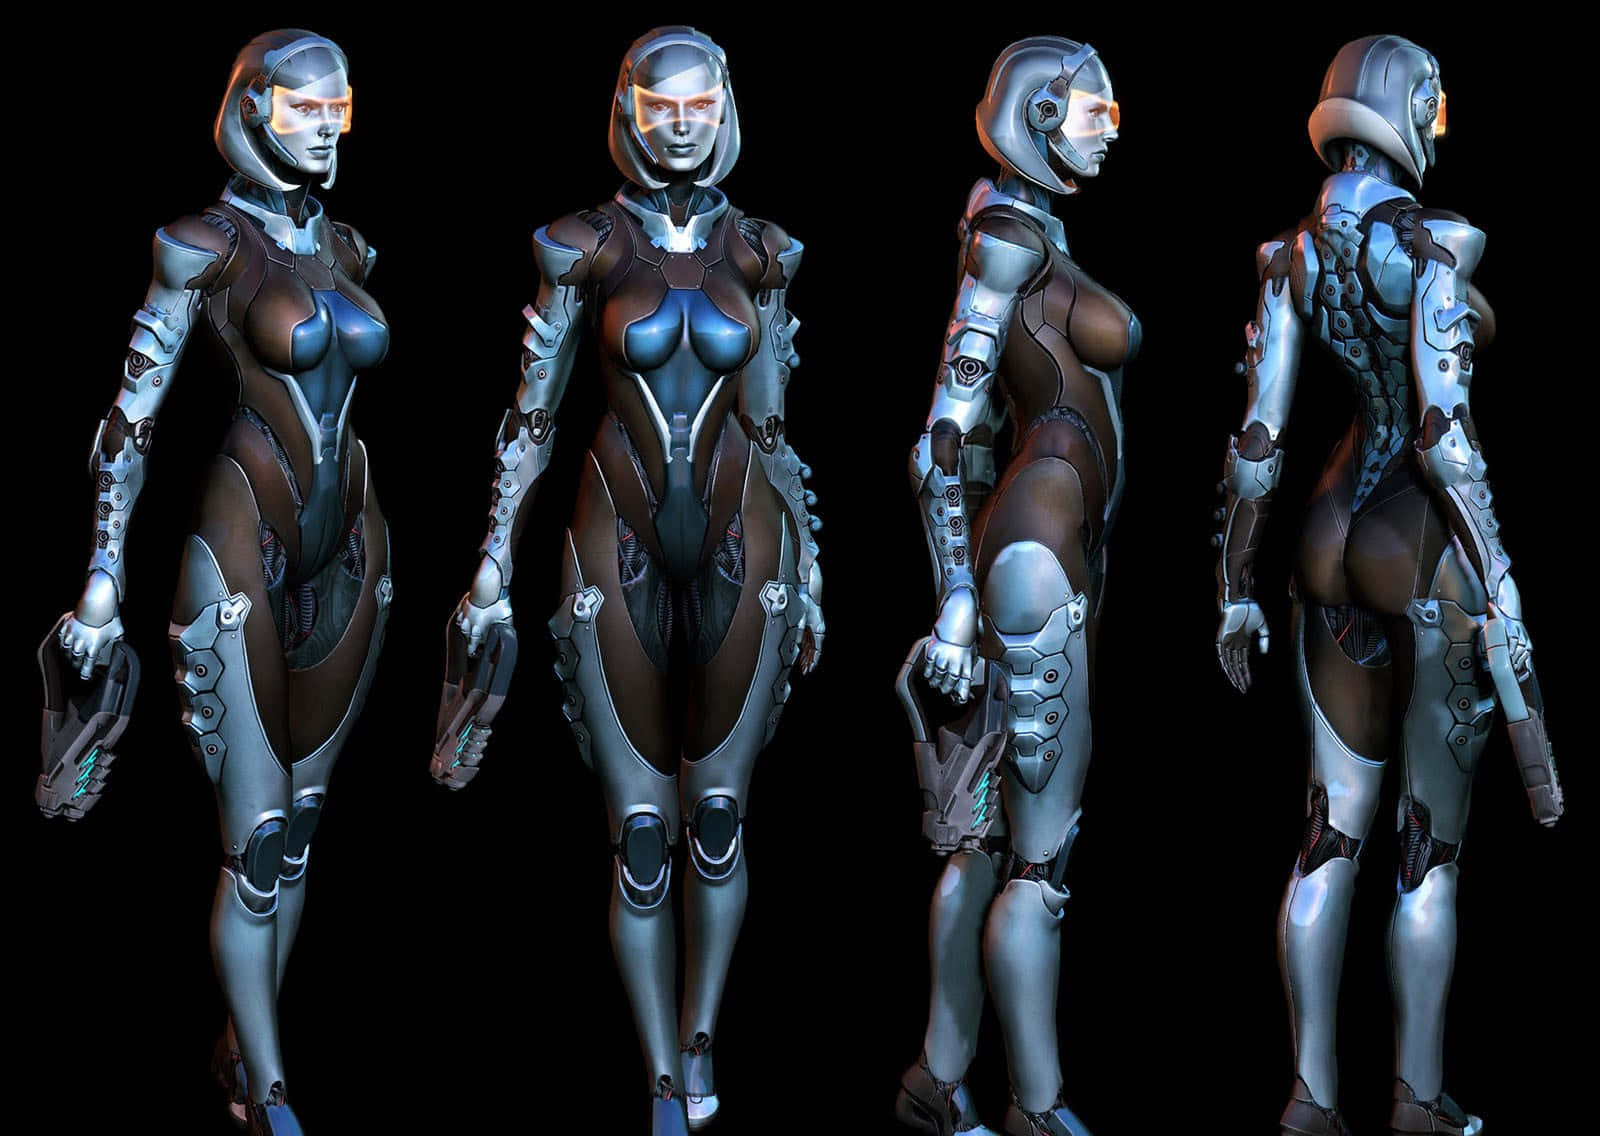 EDI the AI character from Mass Effect Wallpaper